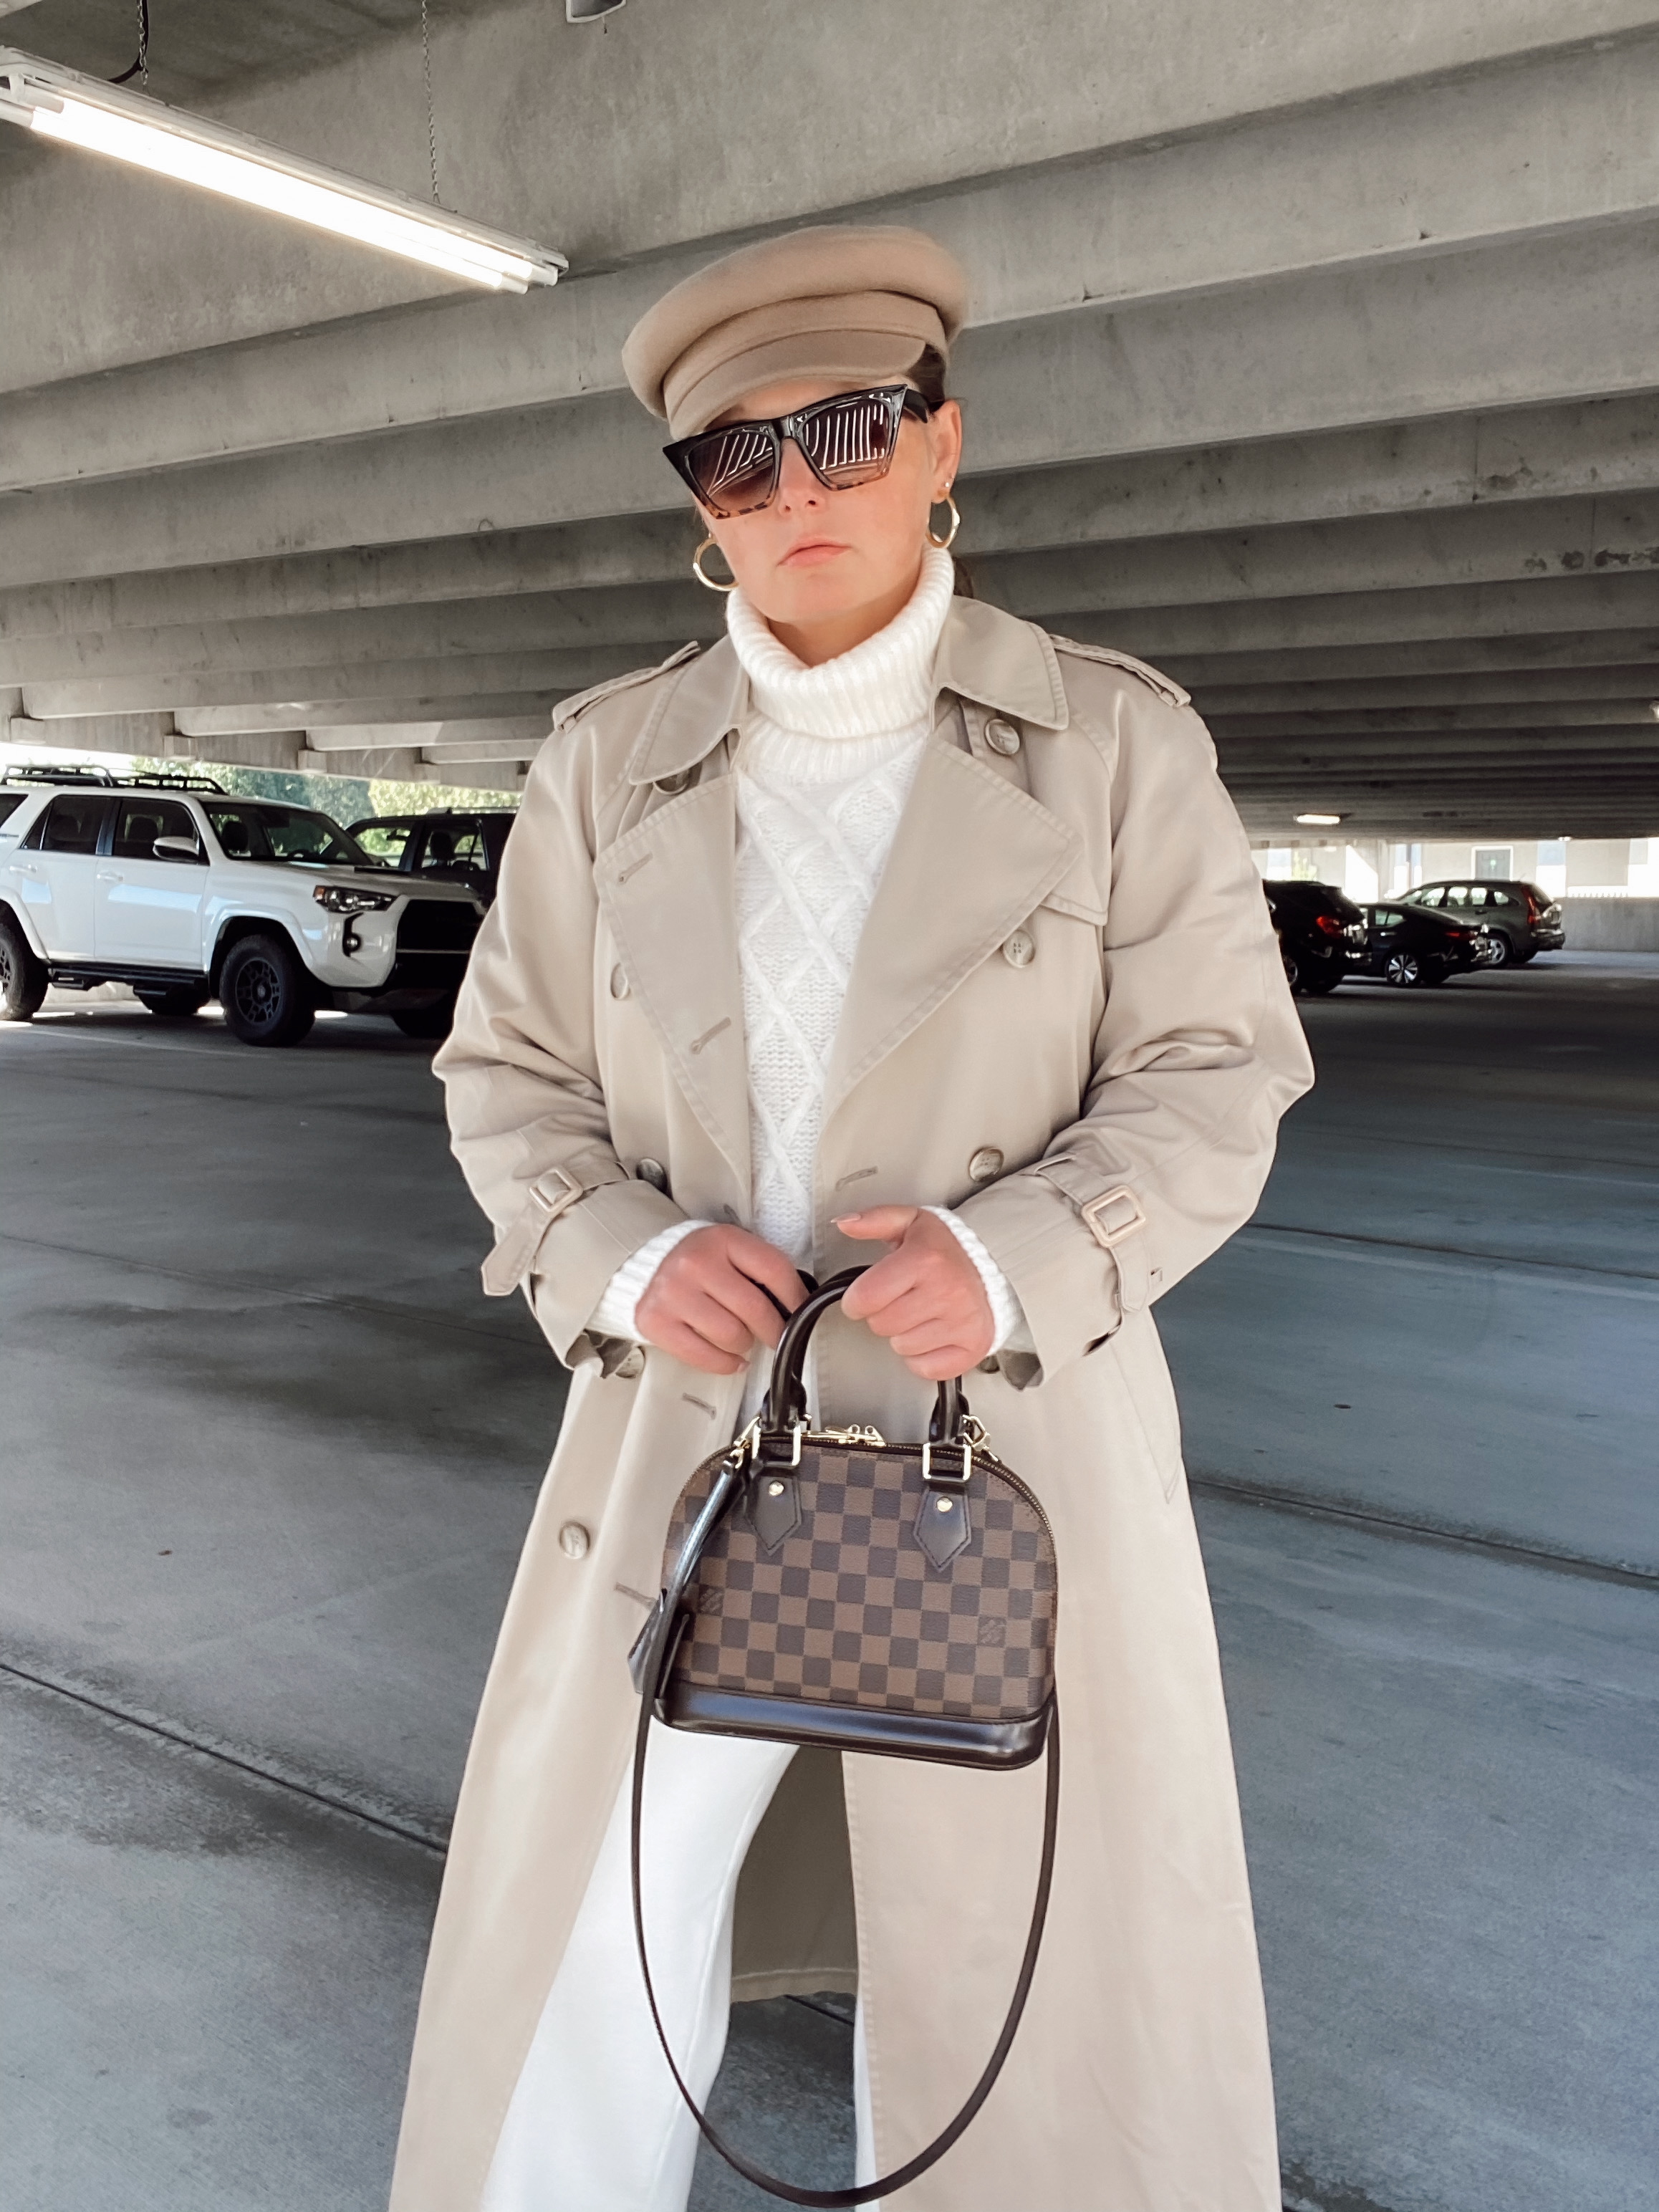 5 WAYS TO WEAR A TRENCH COAT: http://www.juliamarieb.com/2020/11/01/5-ways-to-wear-a-trench-coat-|-the-rule-of-5/ | @julia.marie.b